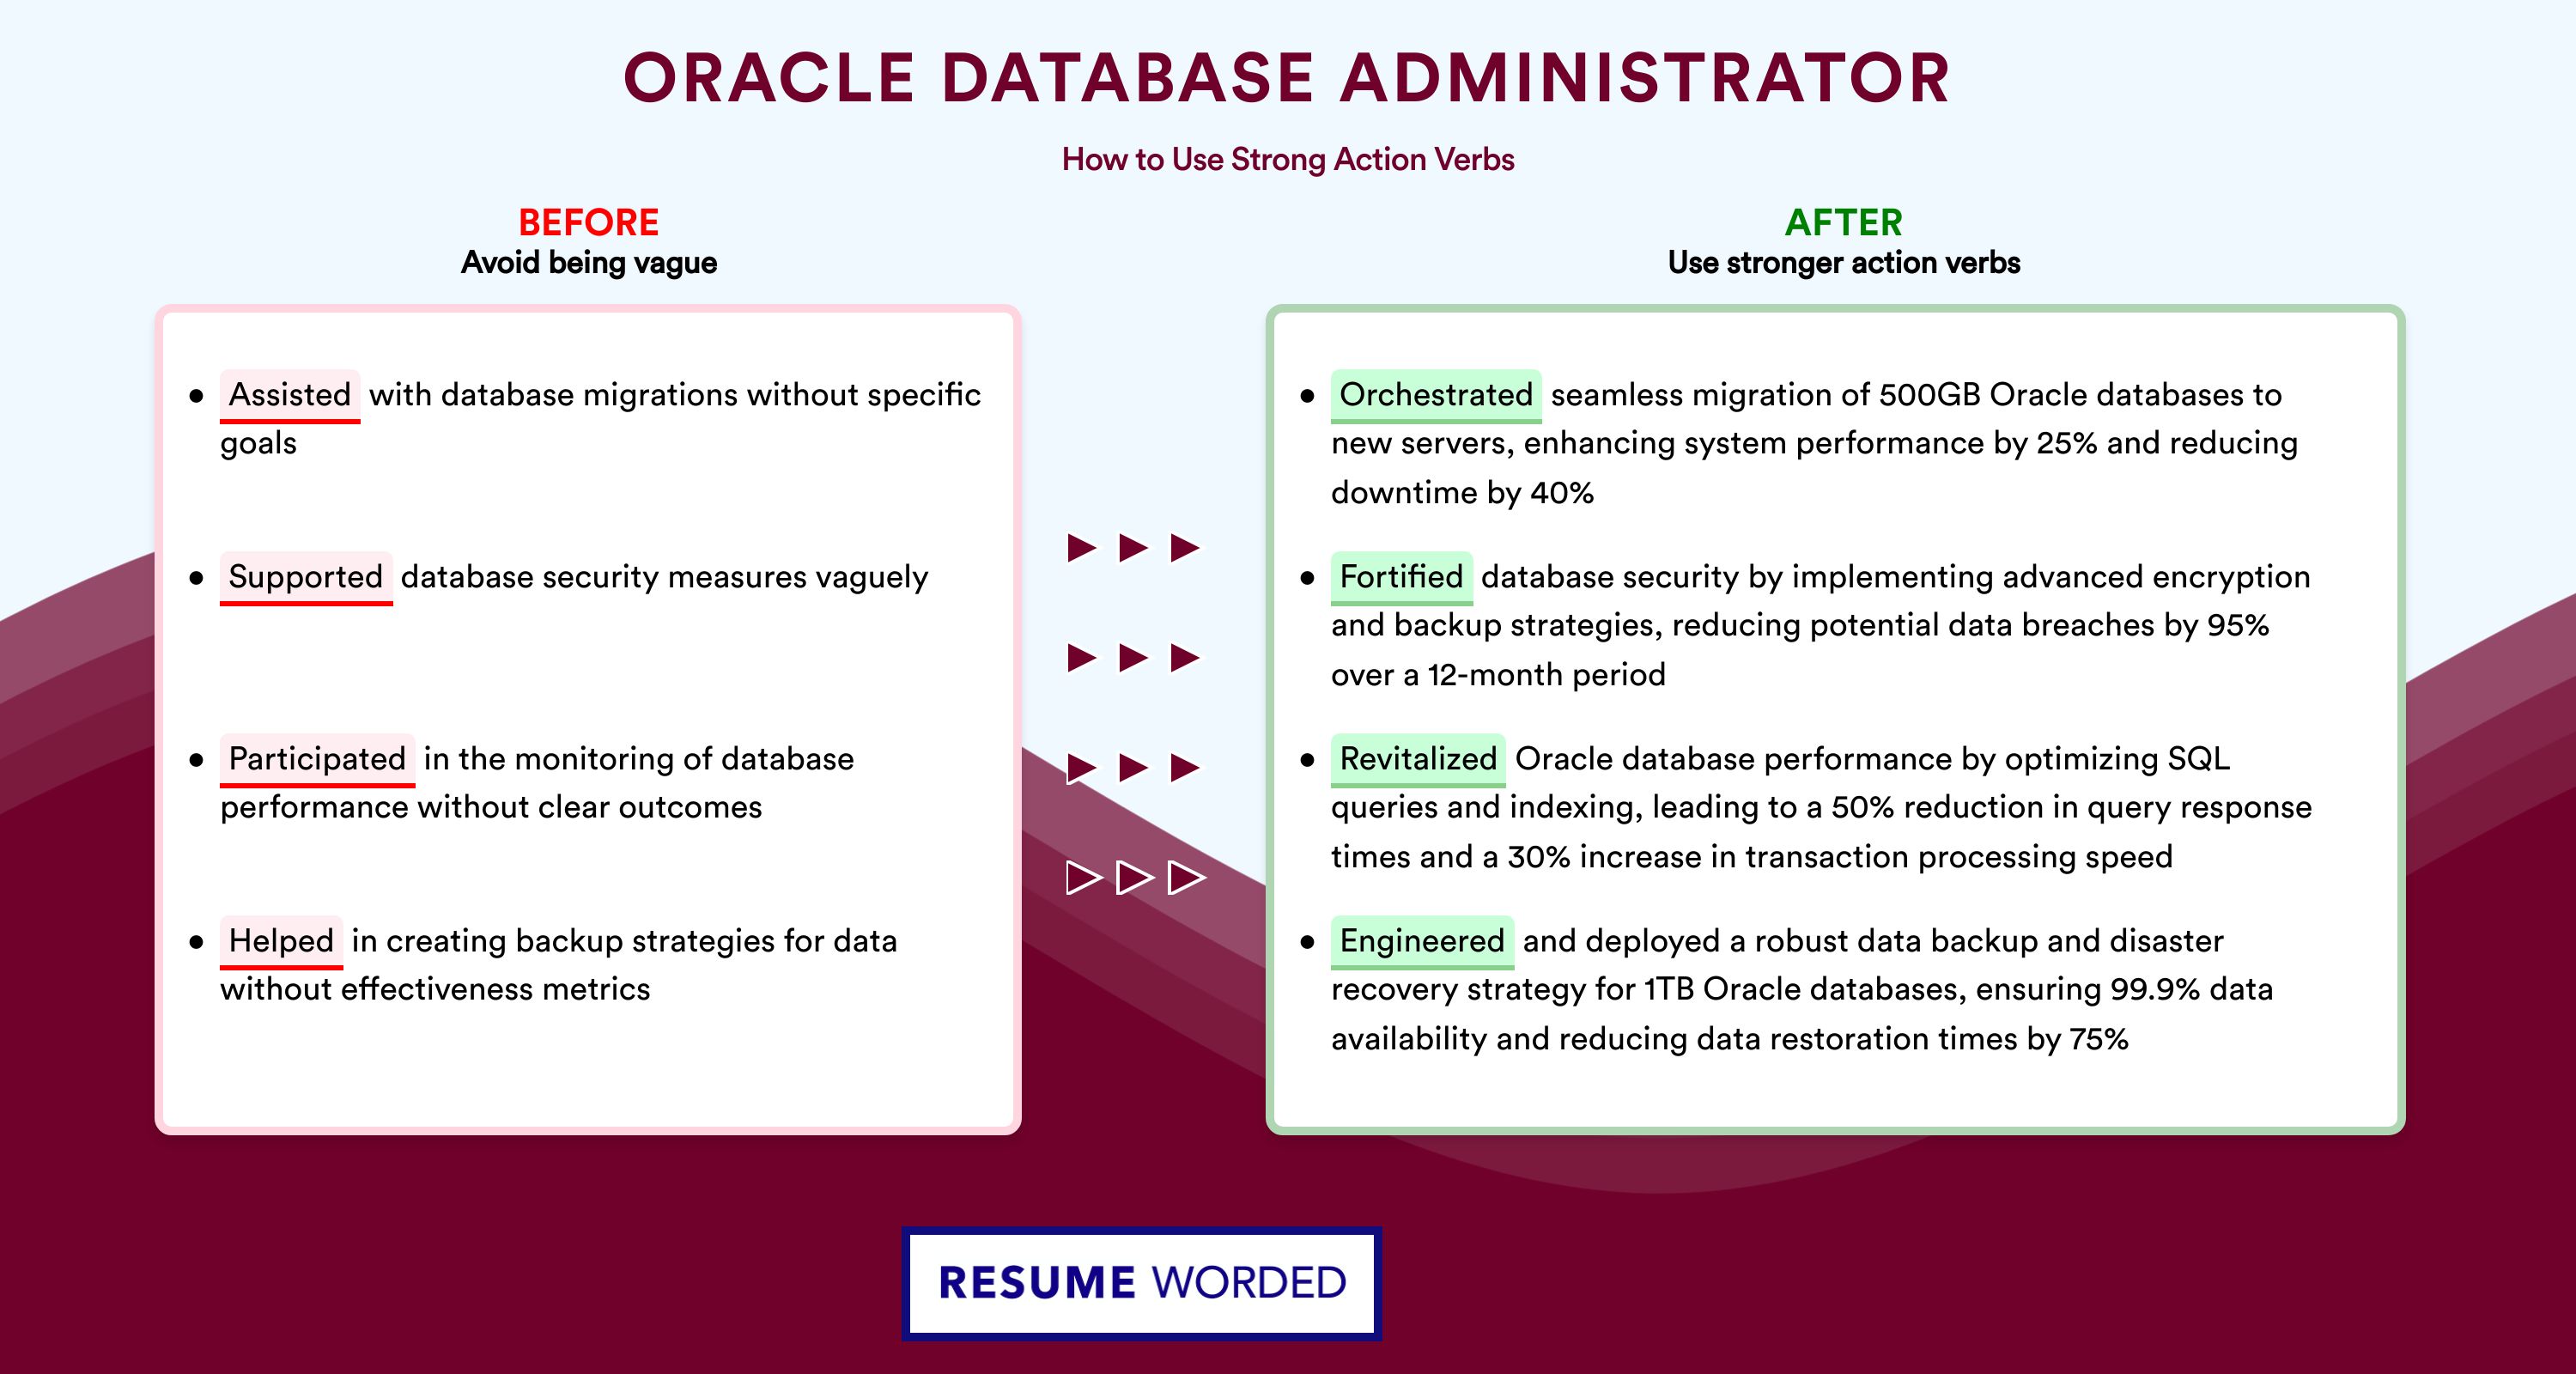 Action Verbs for Oracle Database Administrator